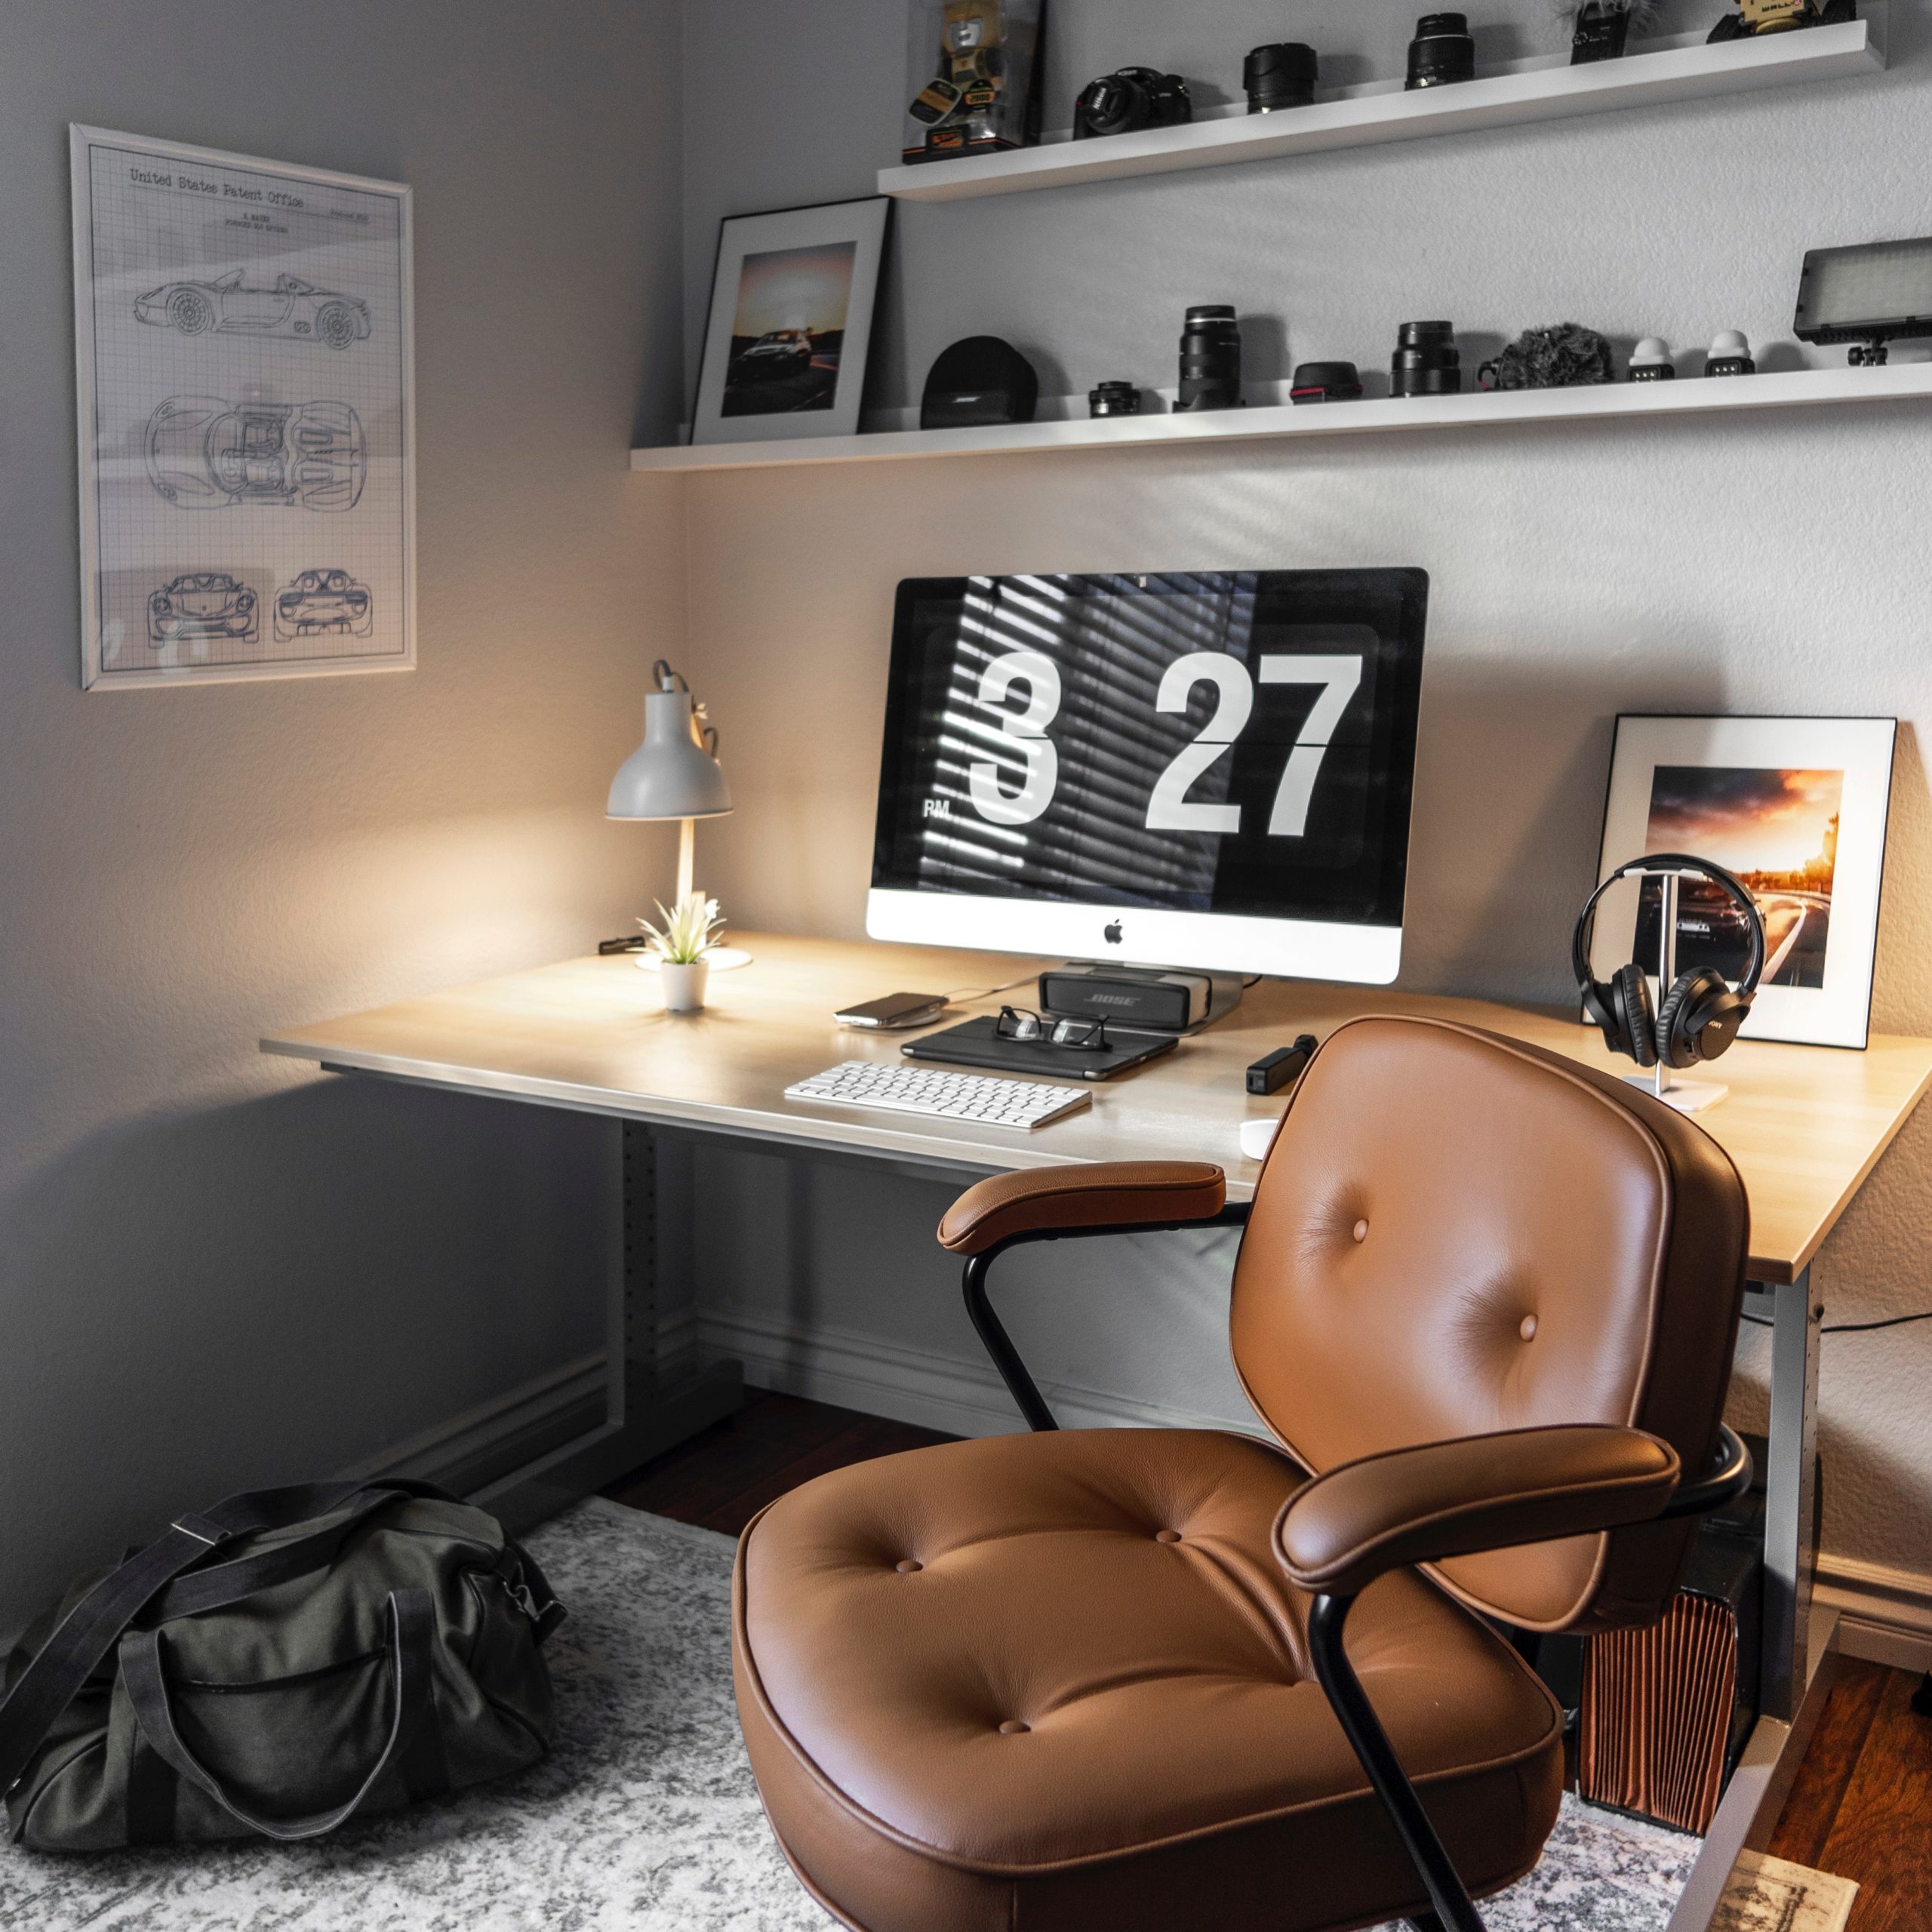 Lifestyle - a stylish home office setup -Photo by Michael Soledad